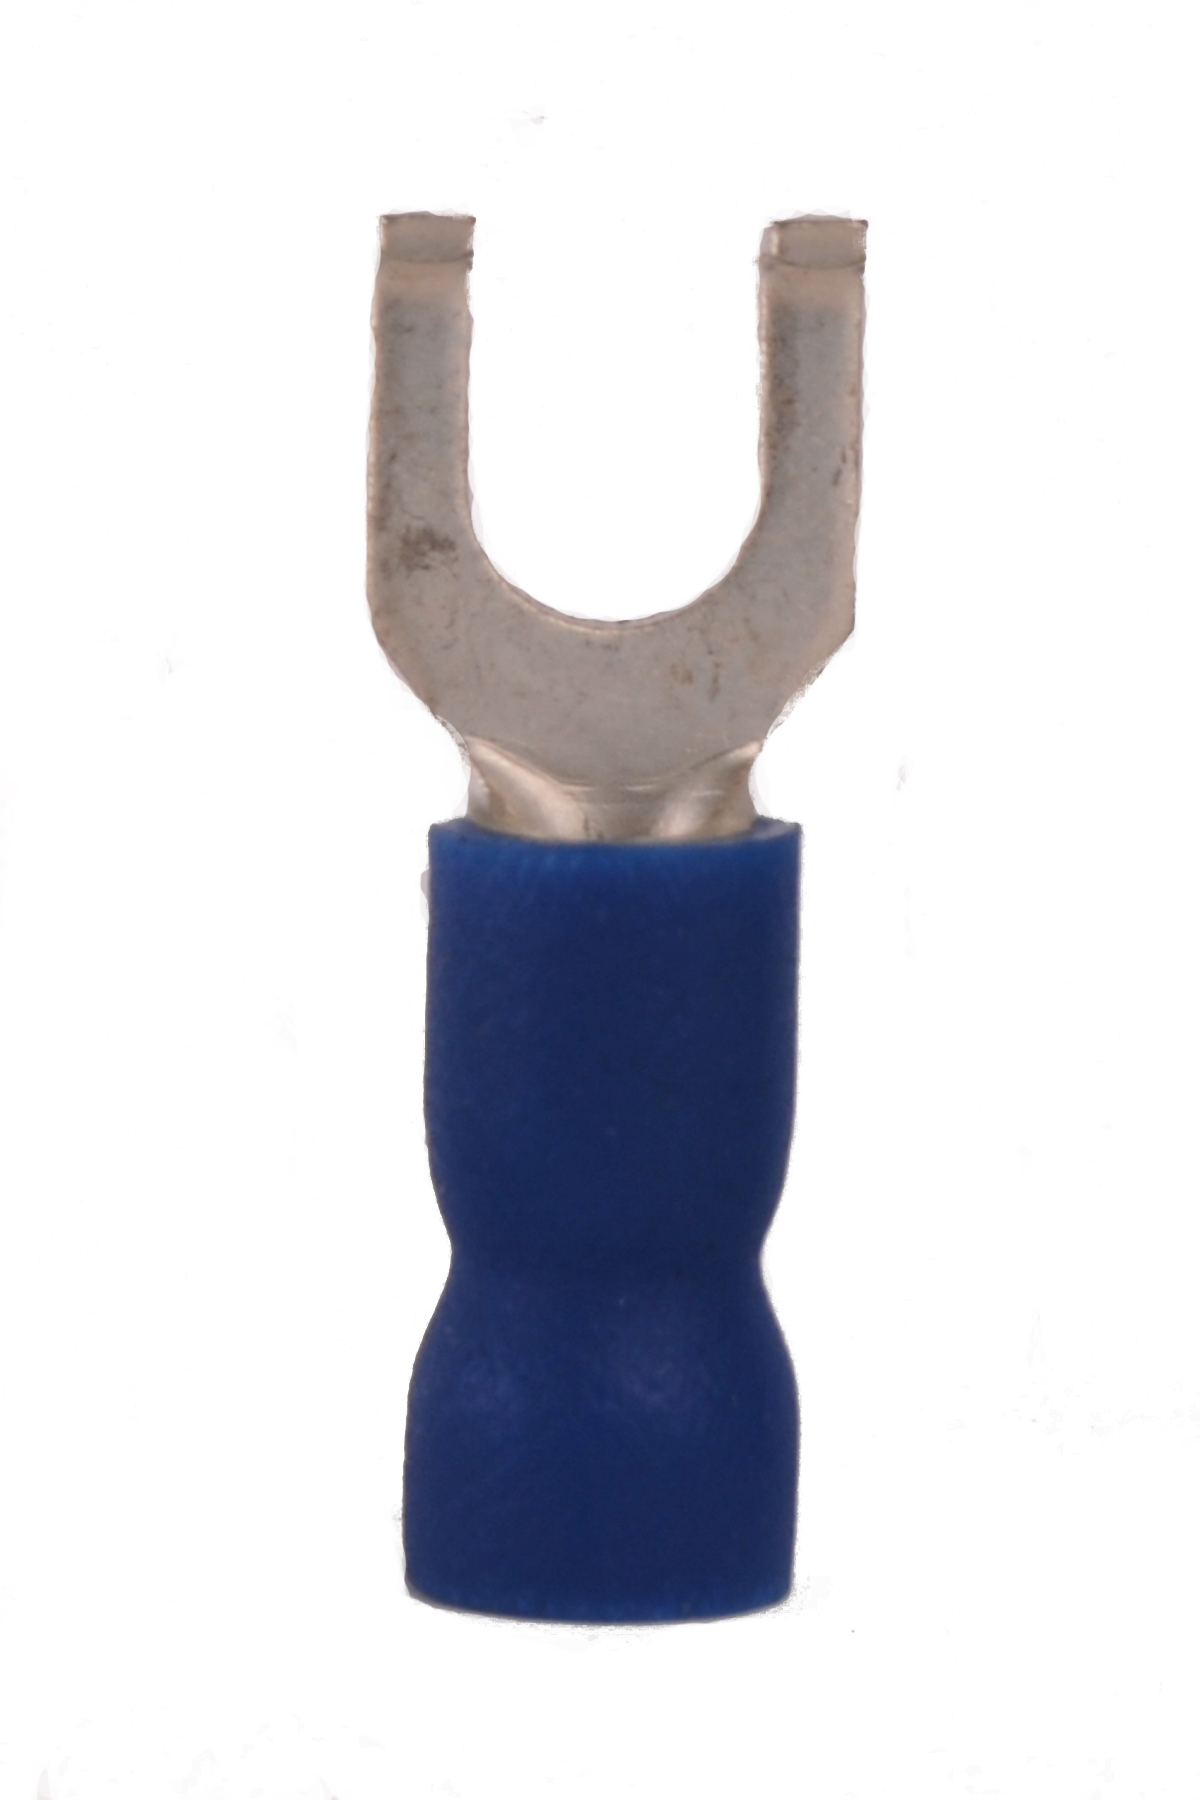 16-14 Vinyl Insulated #8 Flanged Spade